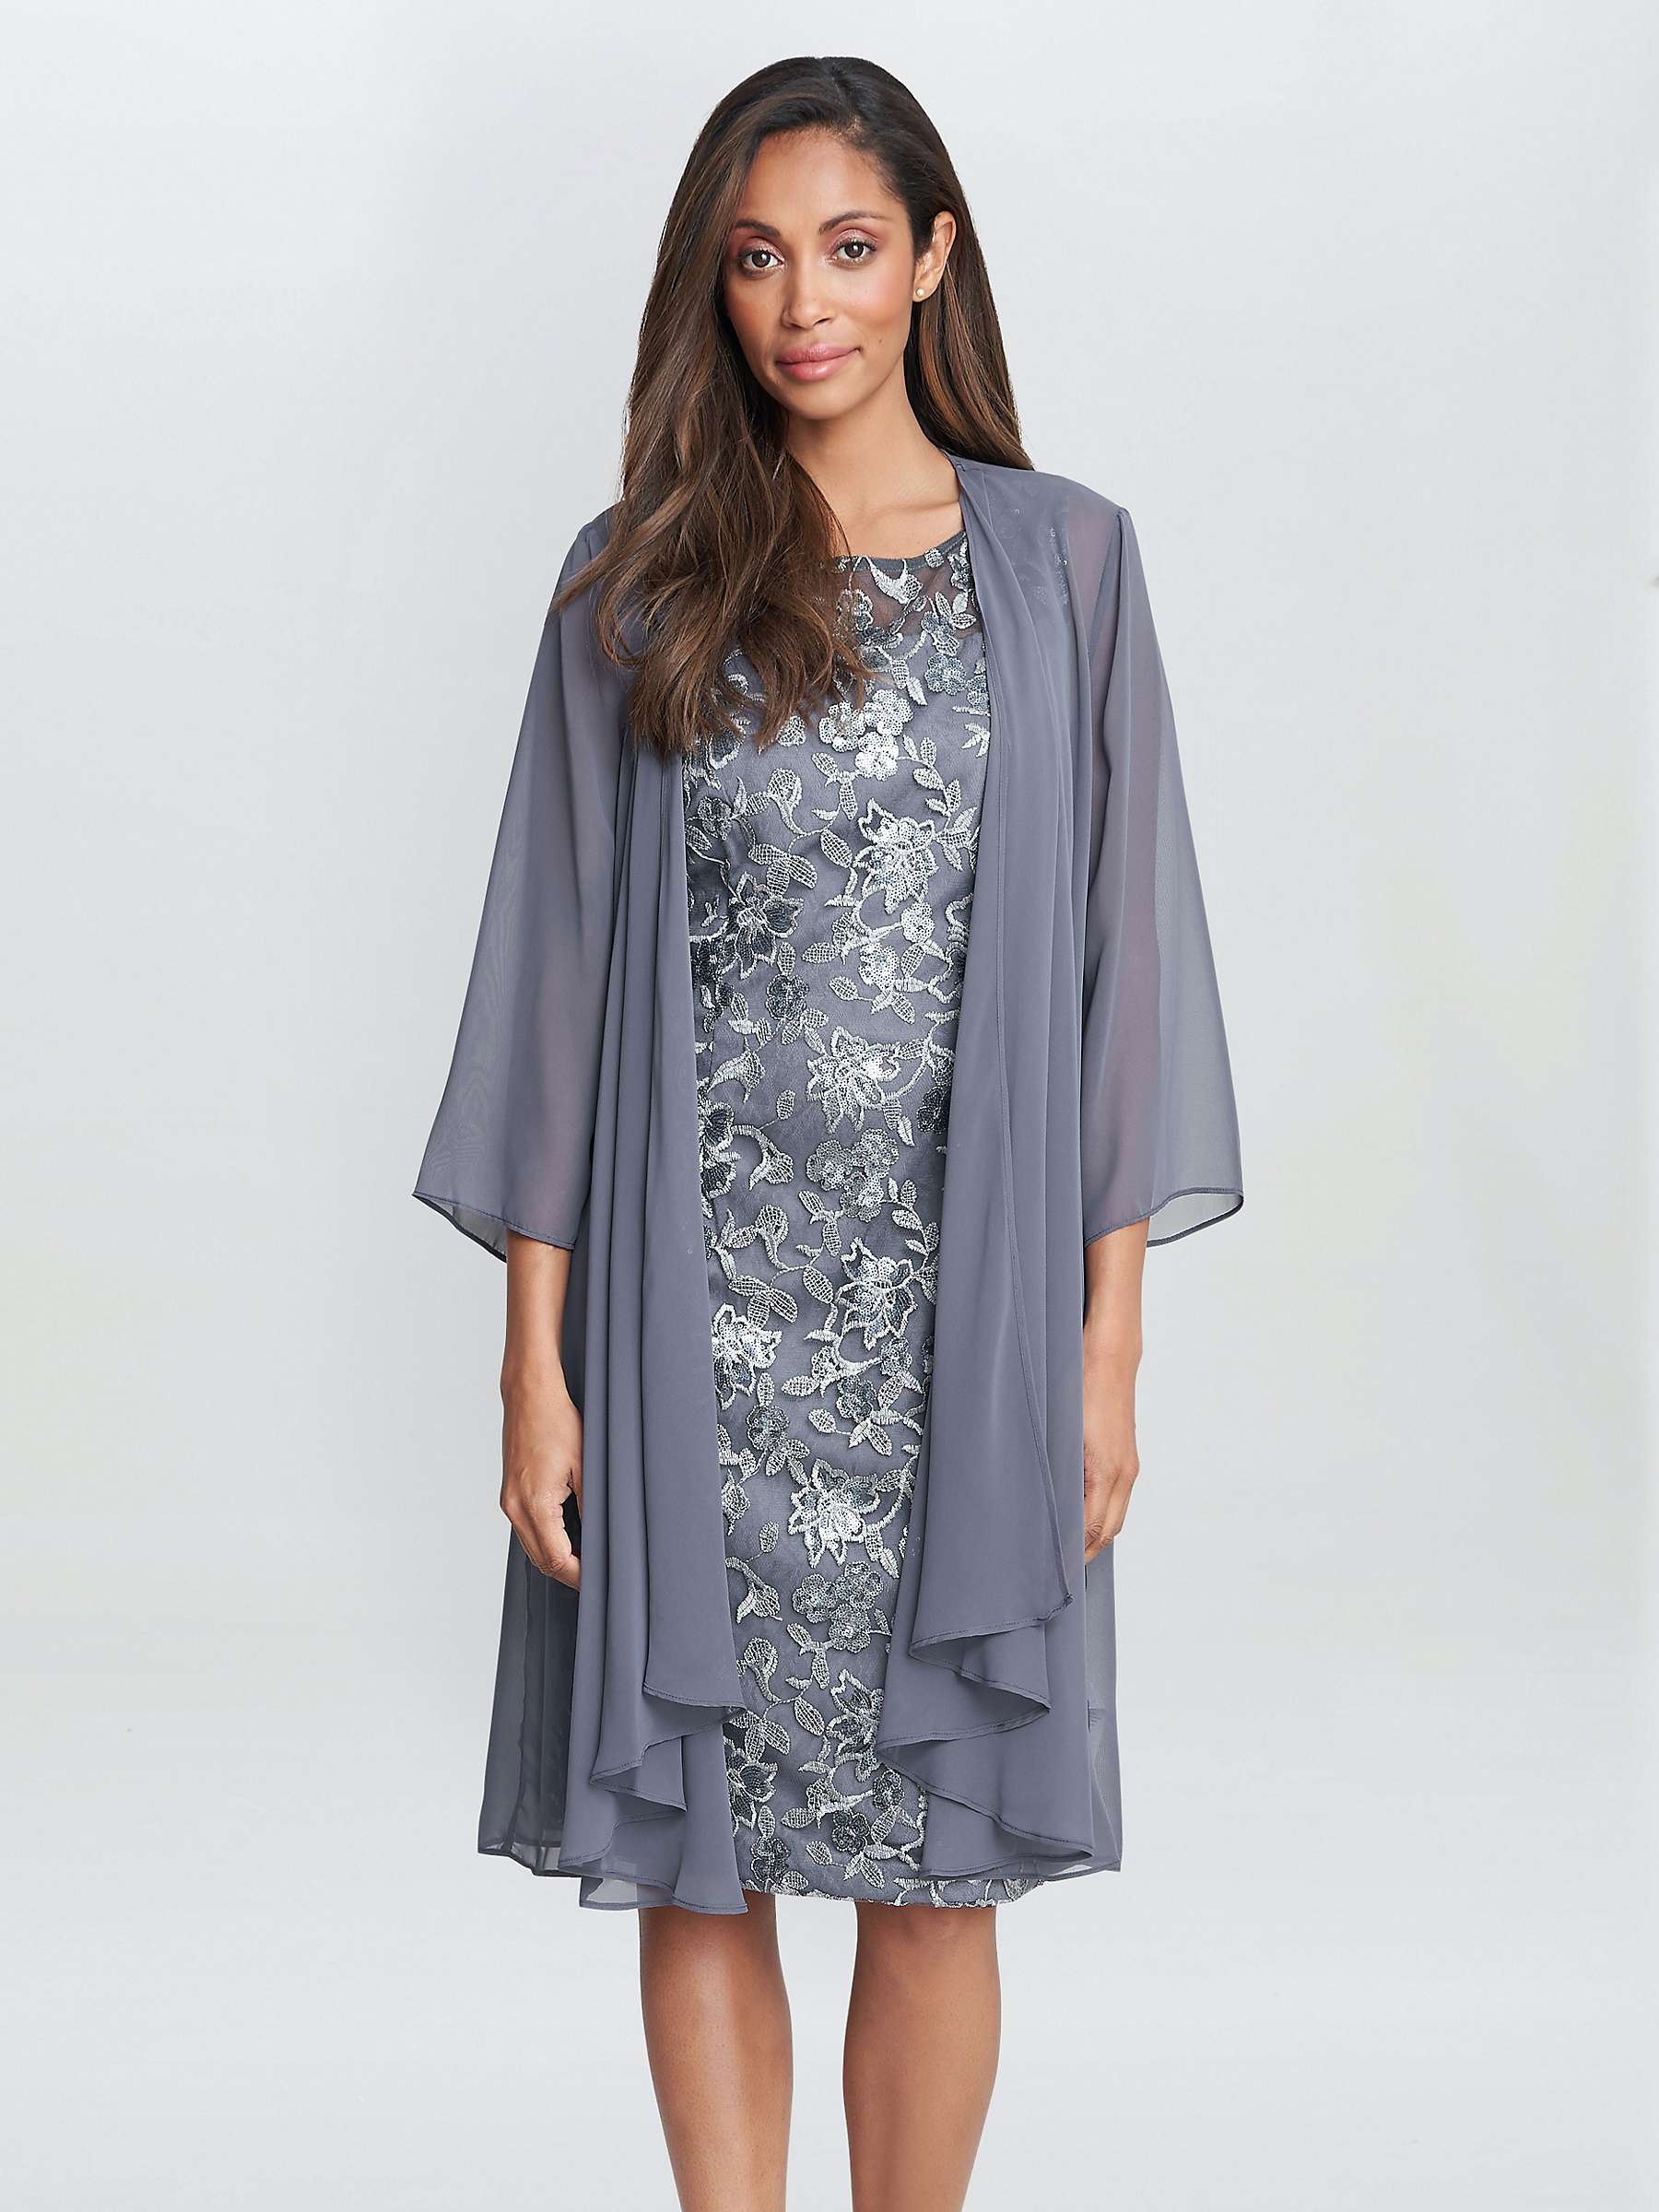 Buy Gina Bacconi Gladys Embroidered Dress with Chiffon Jacket, Pewter Online at johnlewis.com